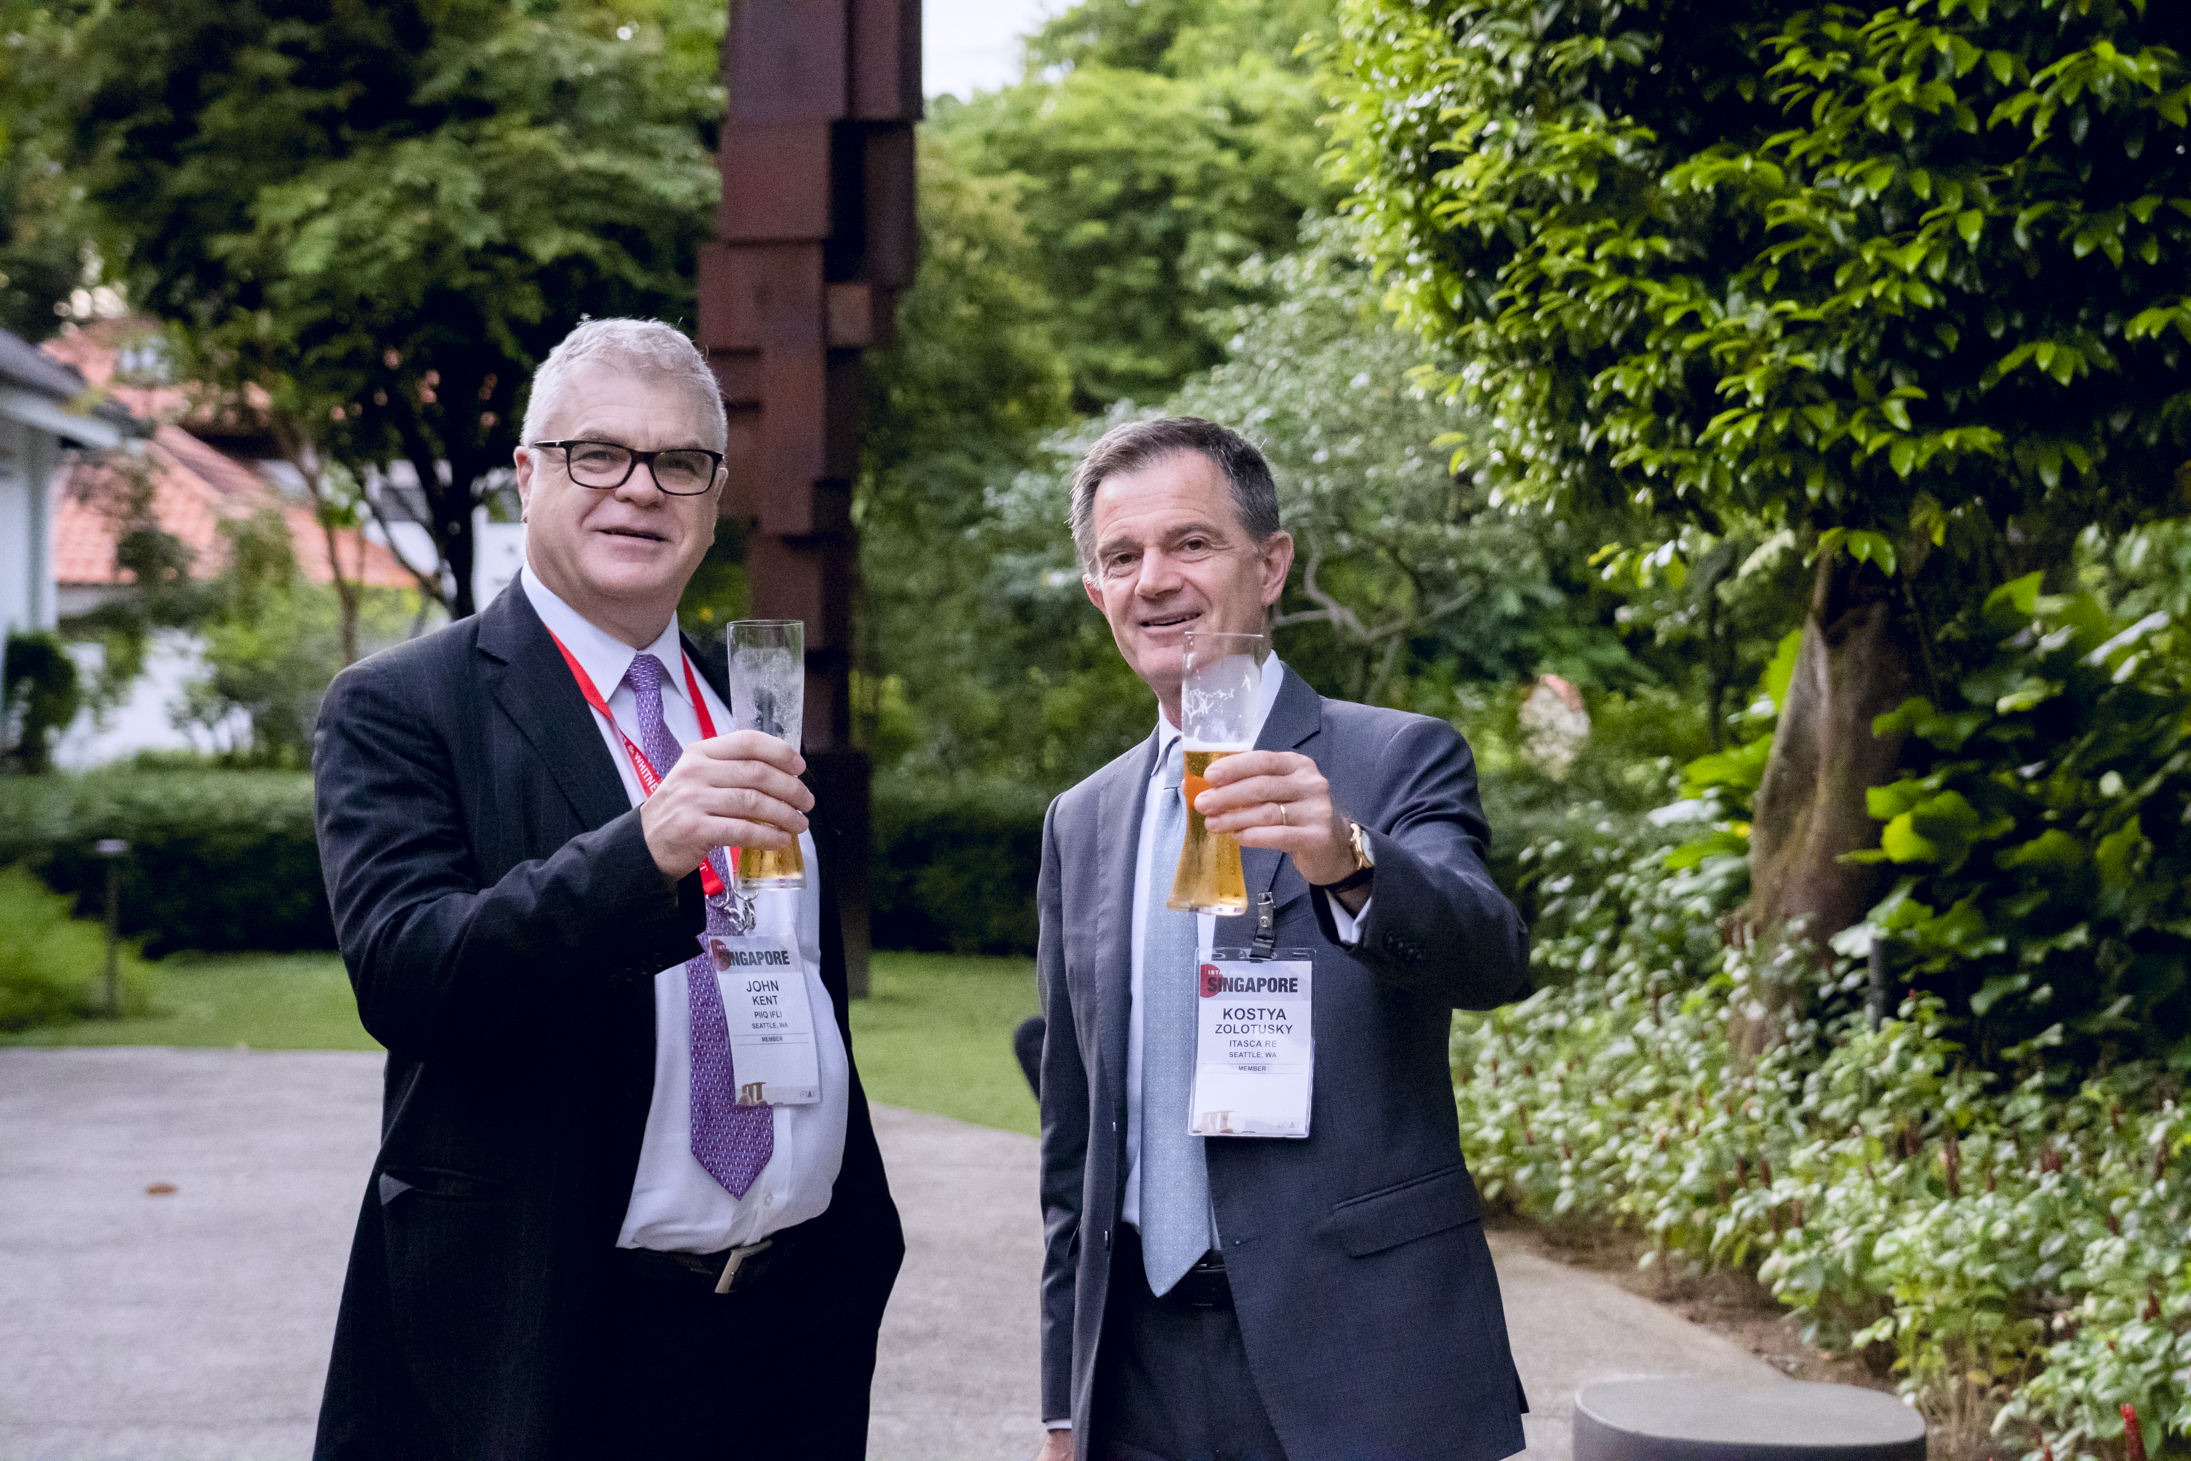 ISTAT Asia Networking Reception 2022